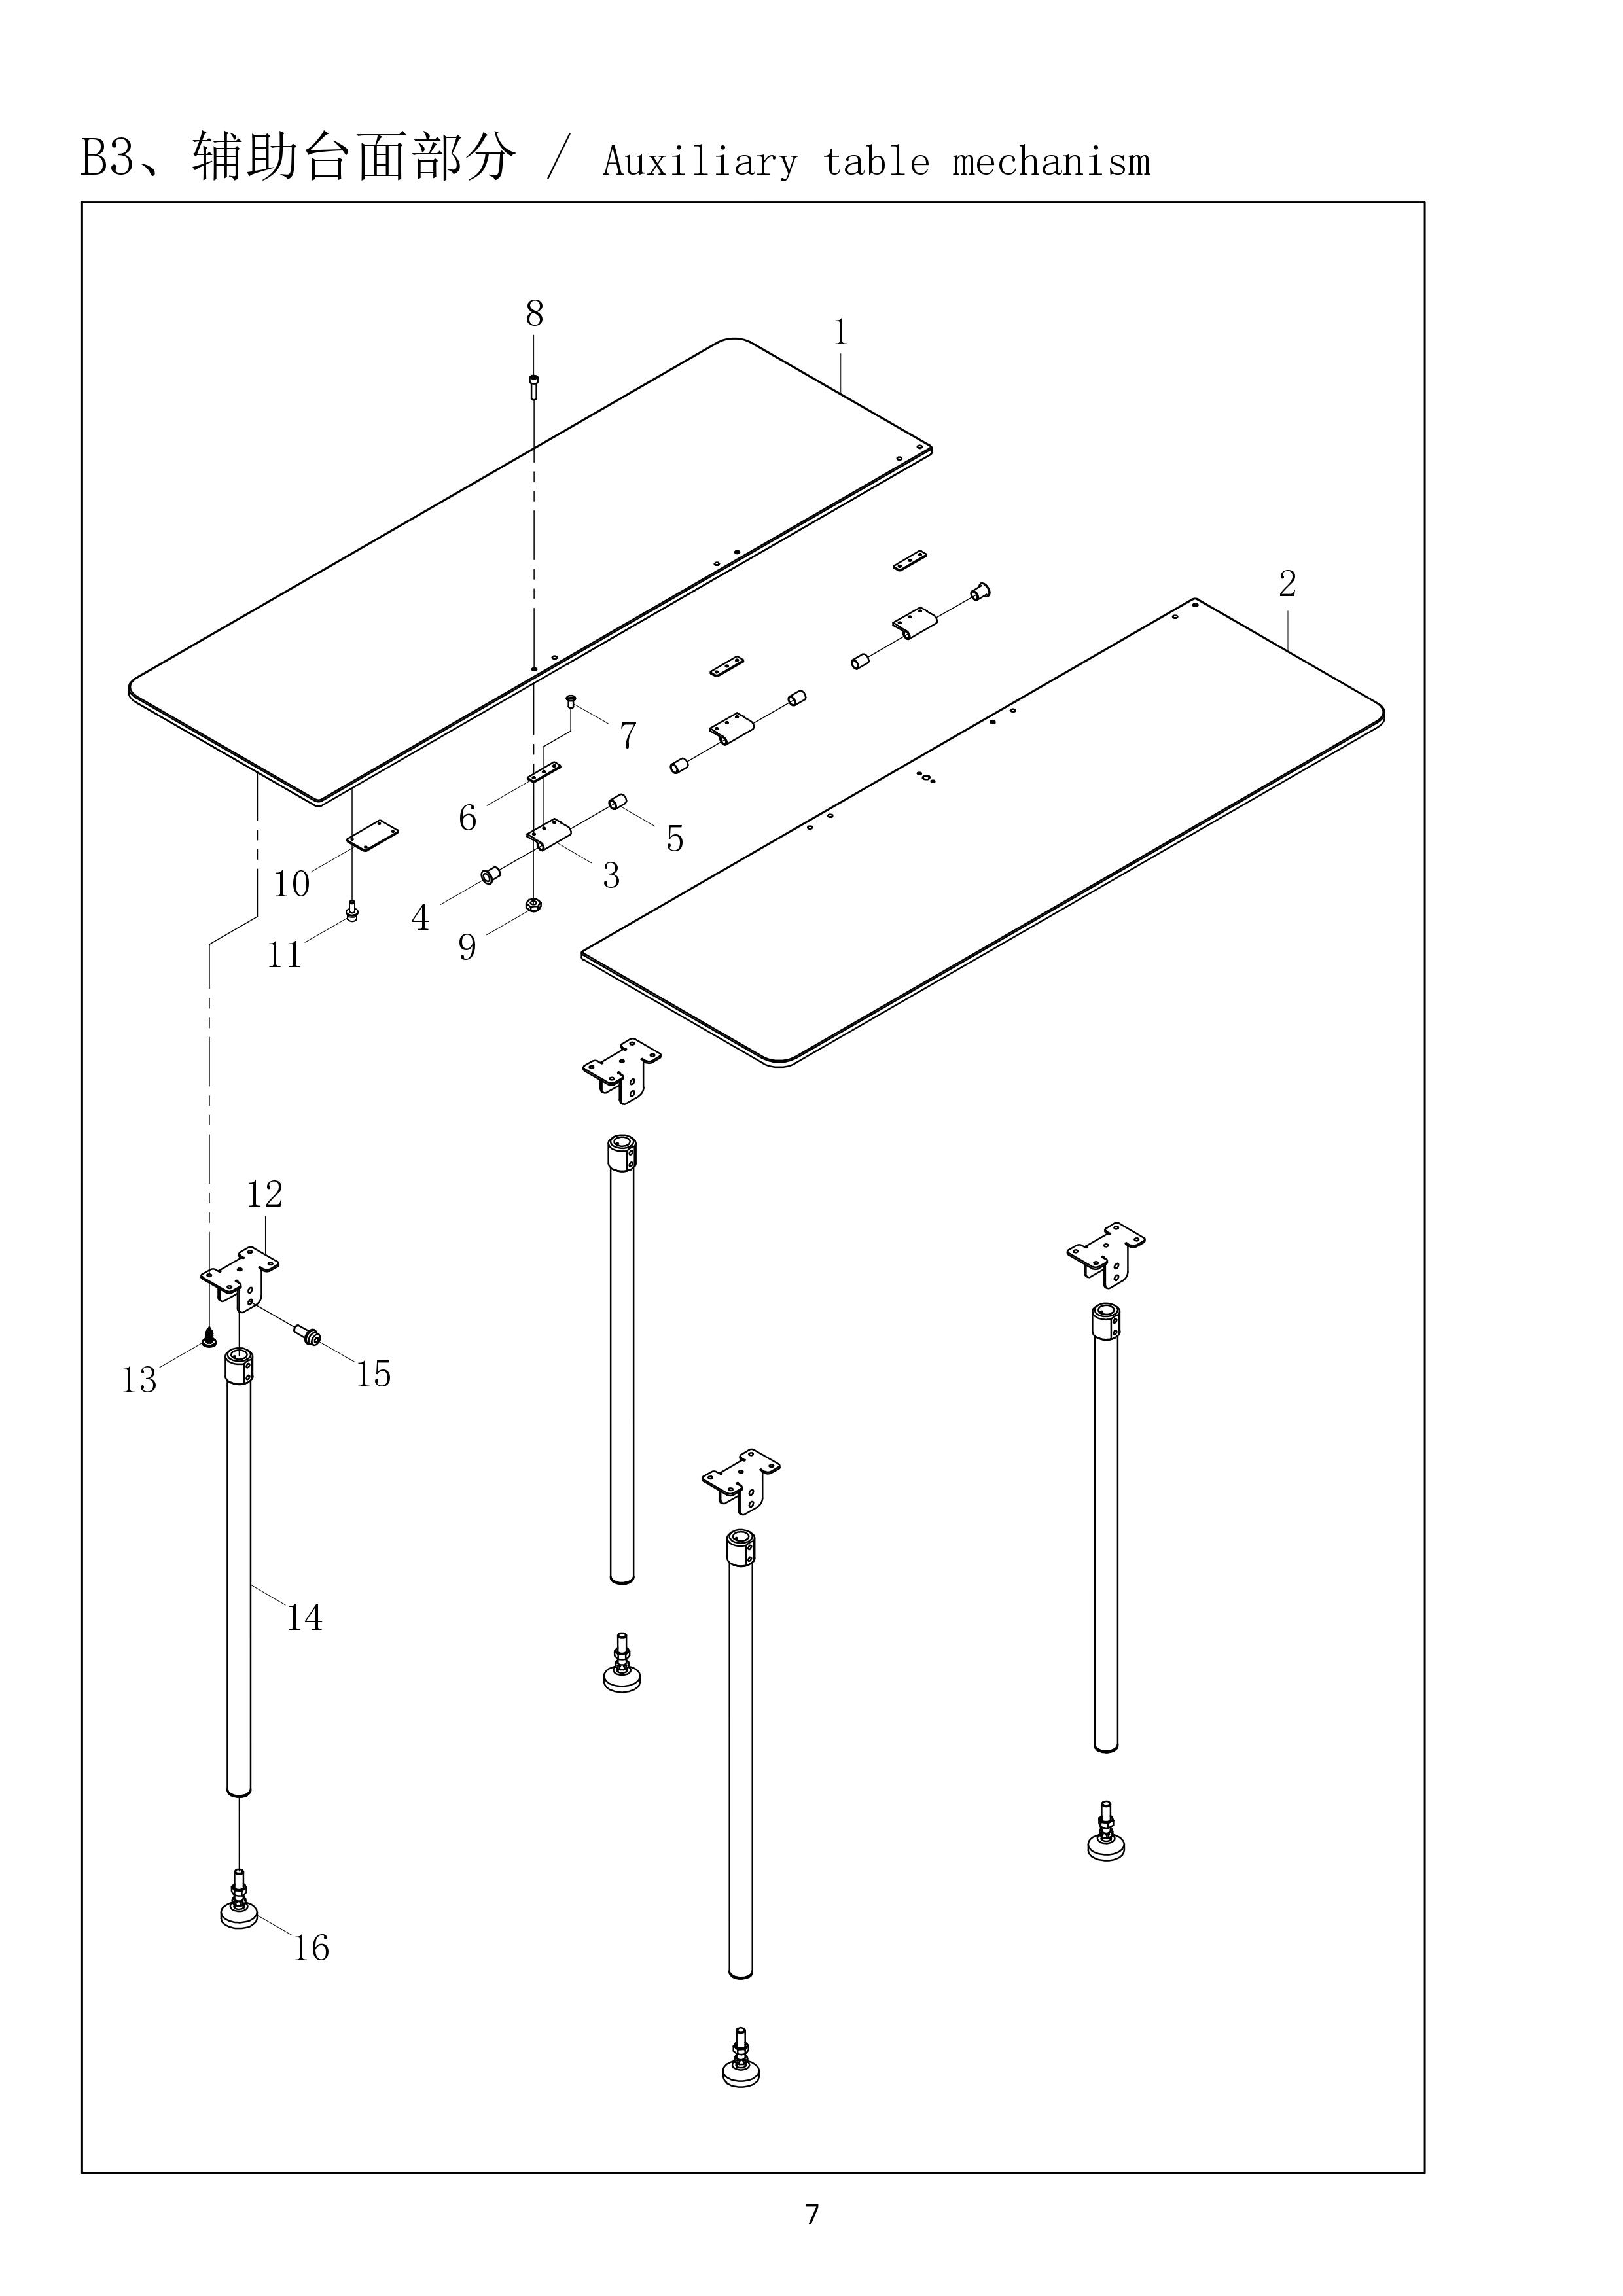 4 AUXILIARY TABLE MECHANISM